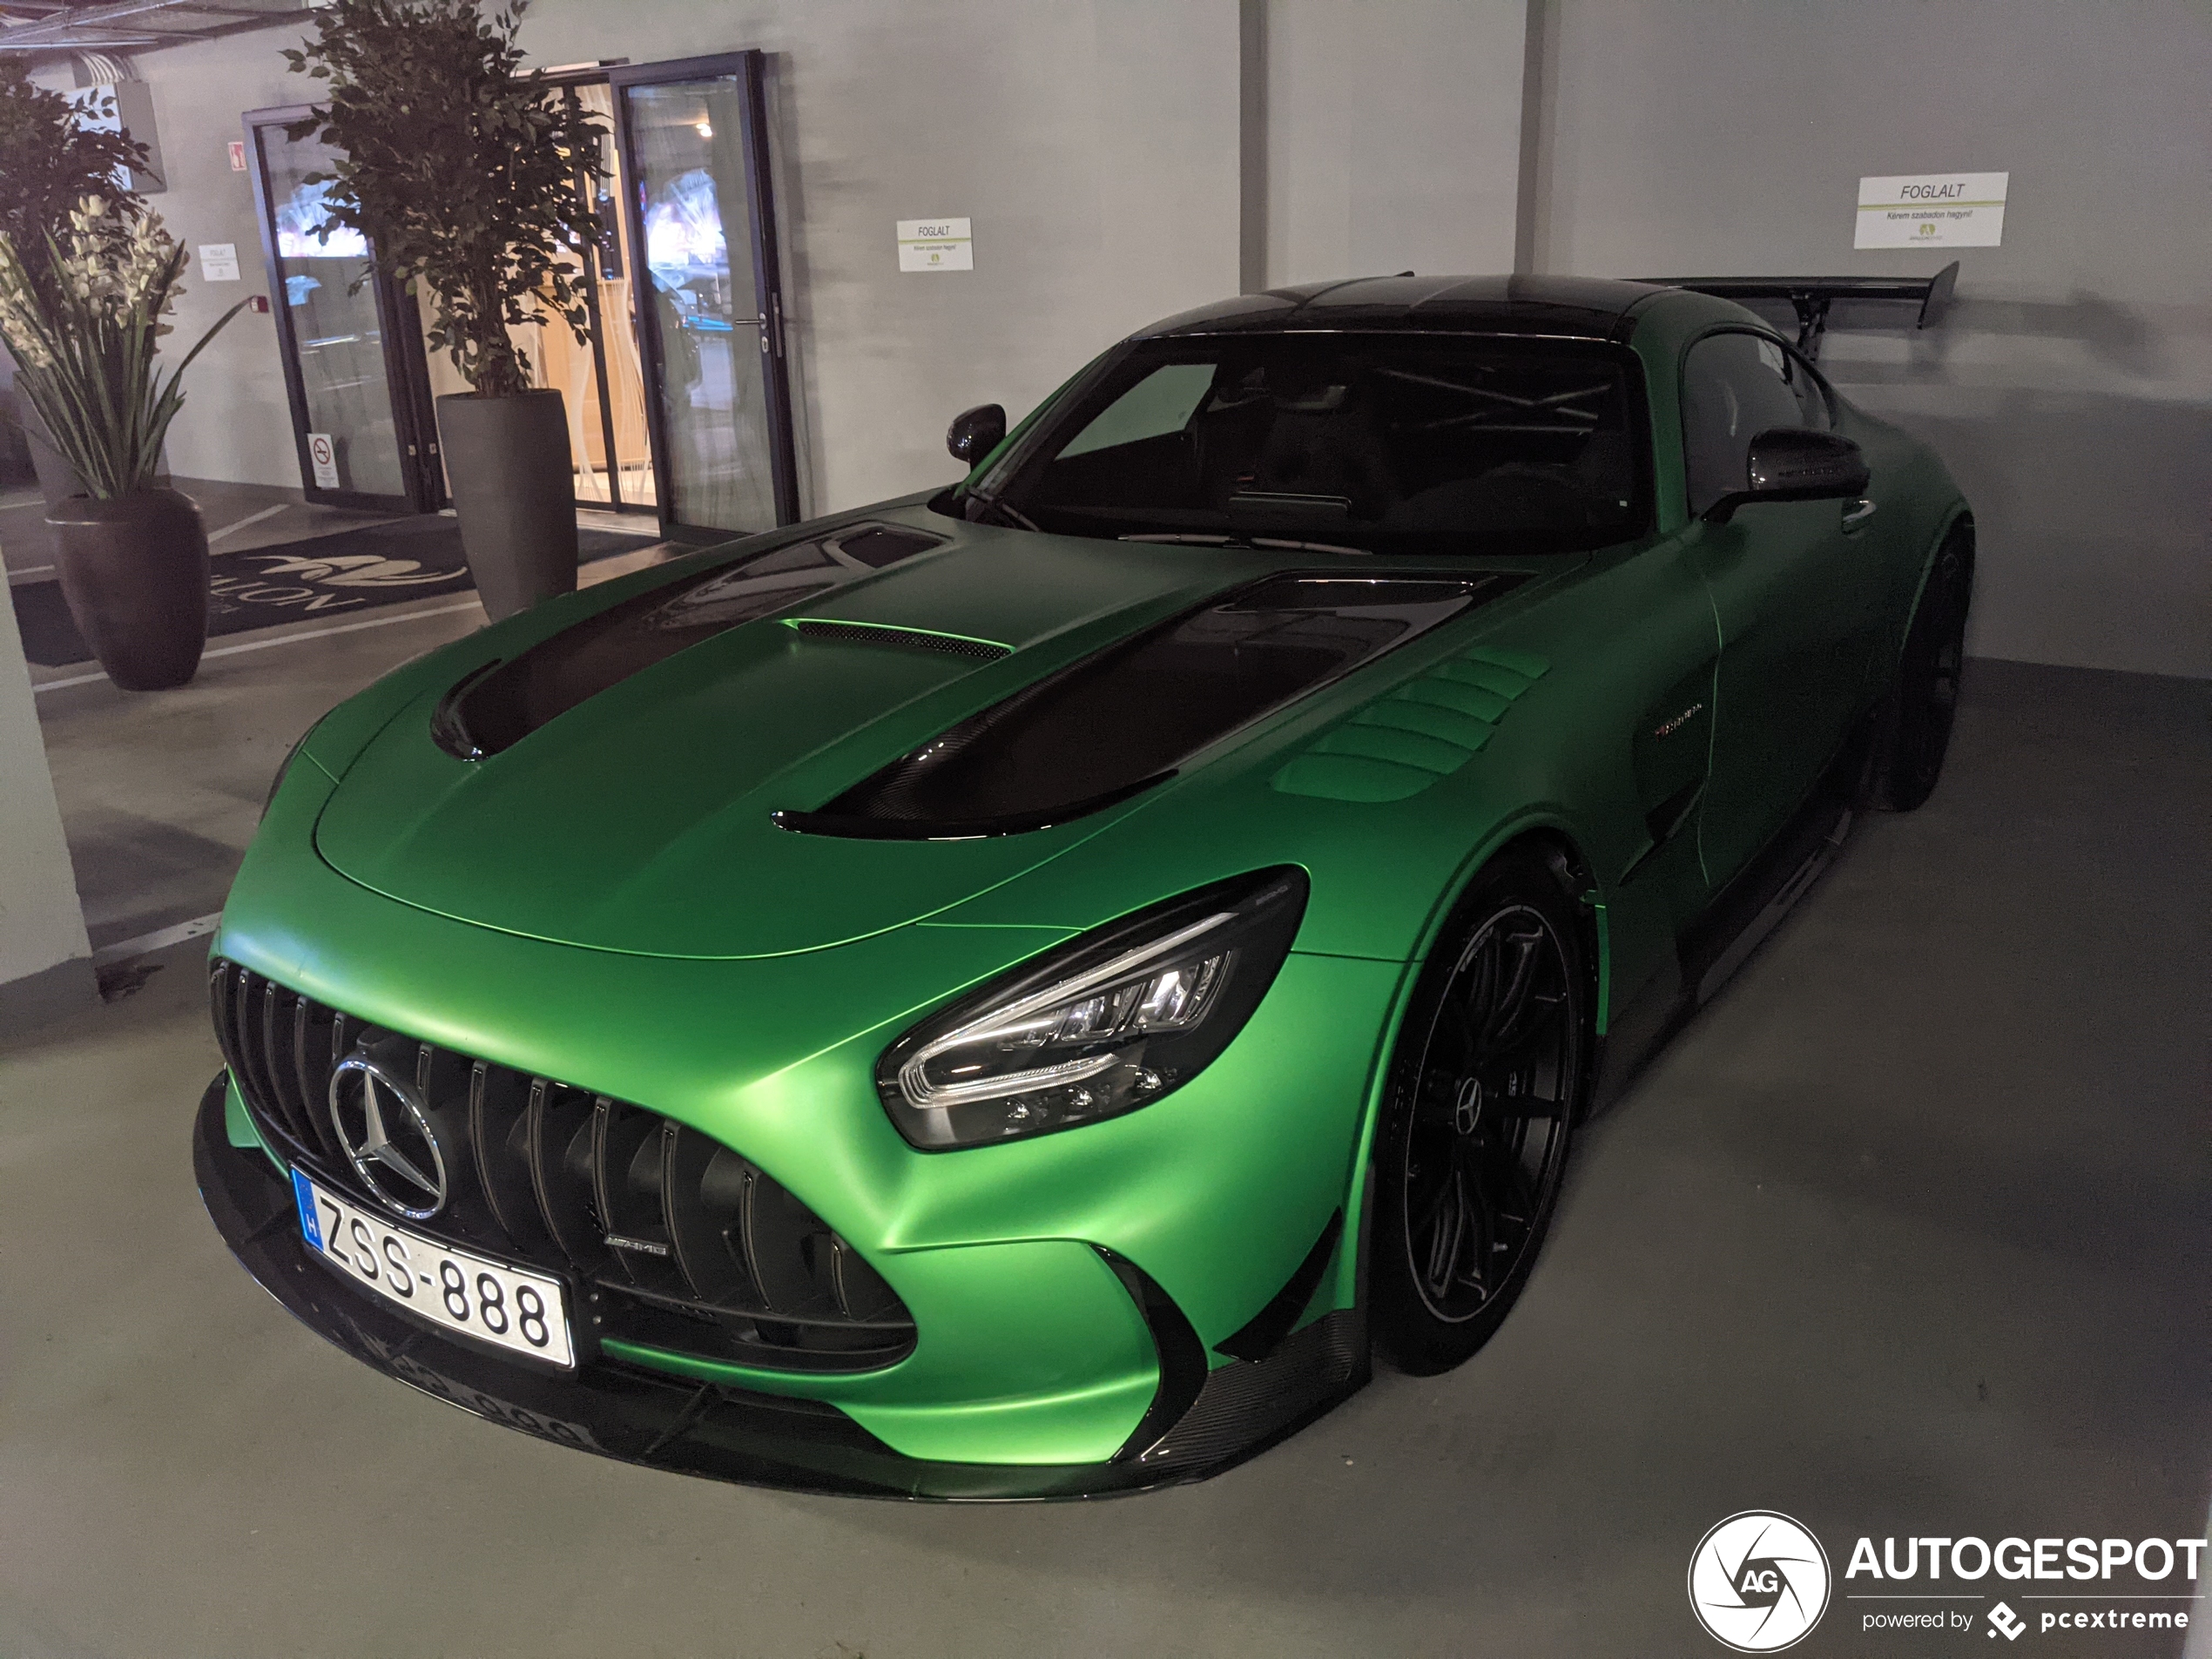 Mercedes-AMG GT Black Series in AMG Green Hell Magno is perfect